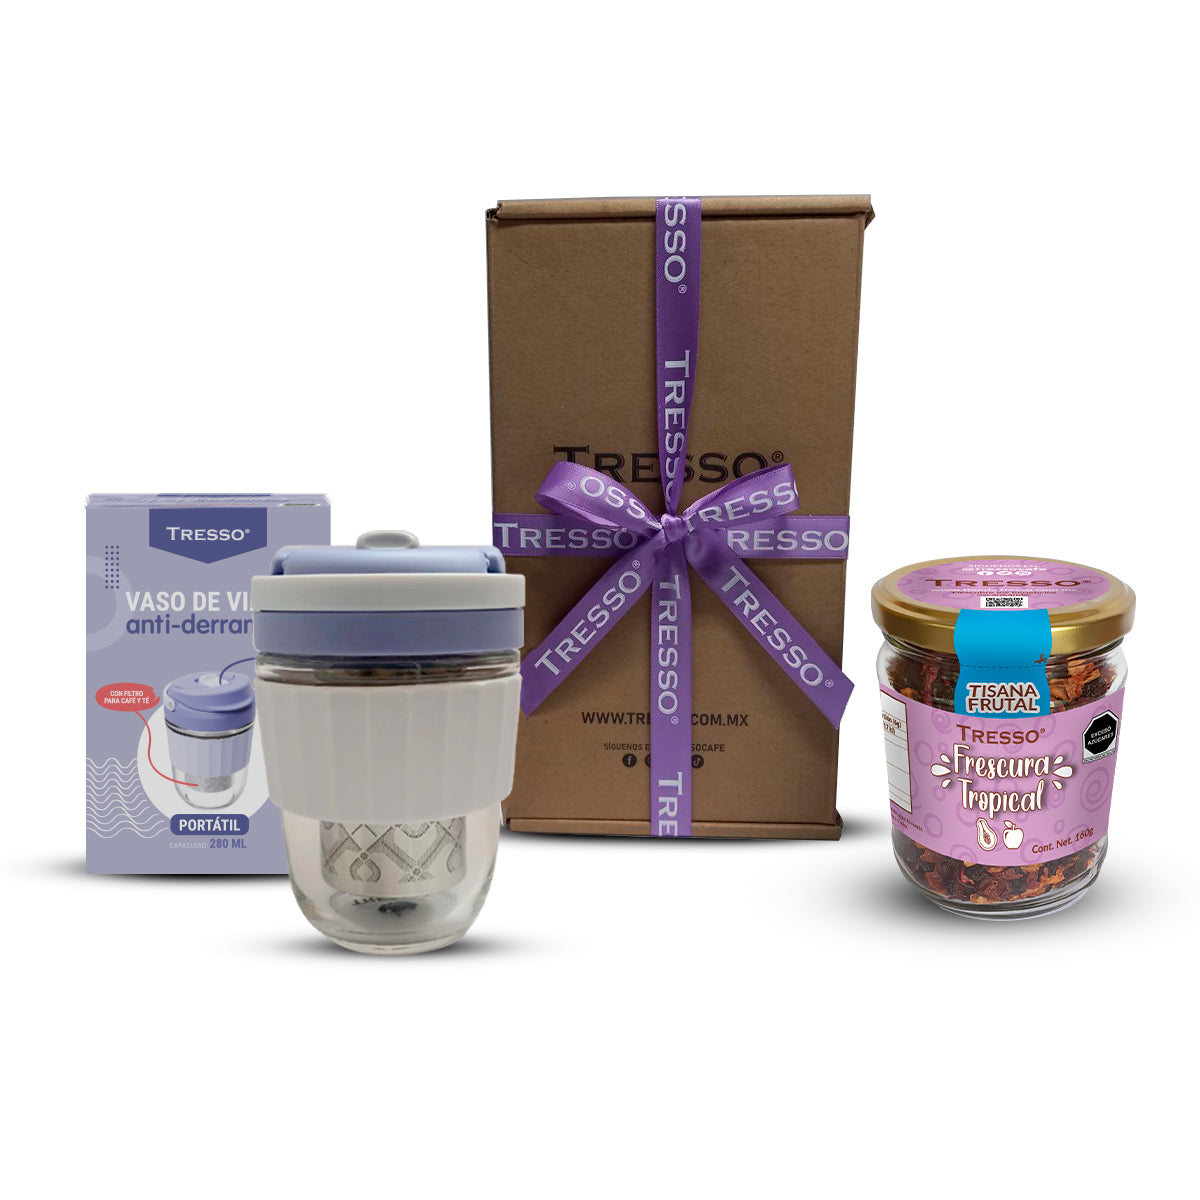 Tea kit with non-spill lavender glass